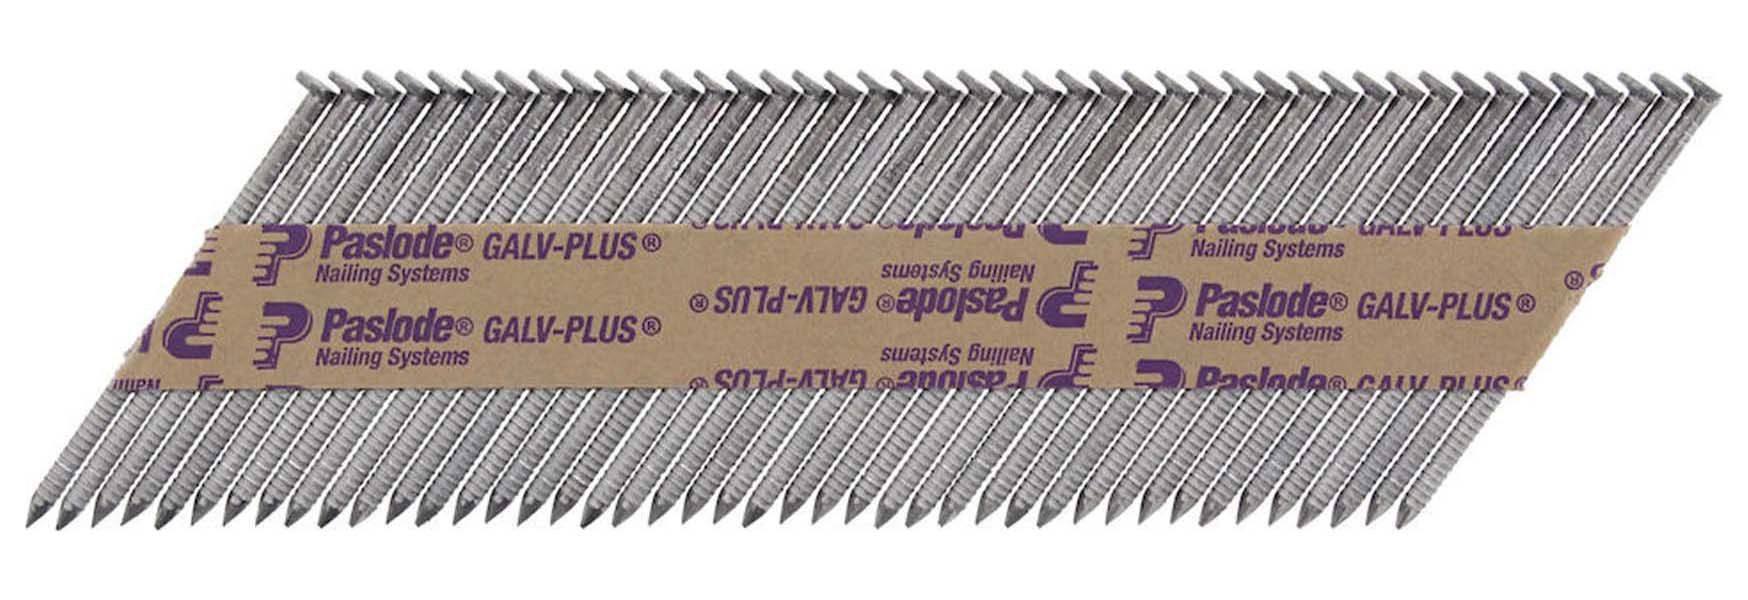 Paslode IM350 2.8mm x 63mm Galv-Plus Collated Box of 1100 Nails + 1 Fuel Cell